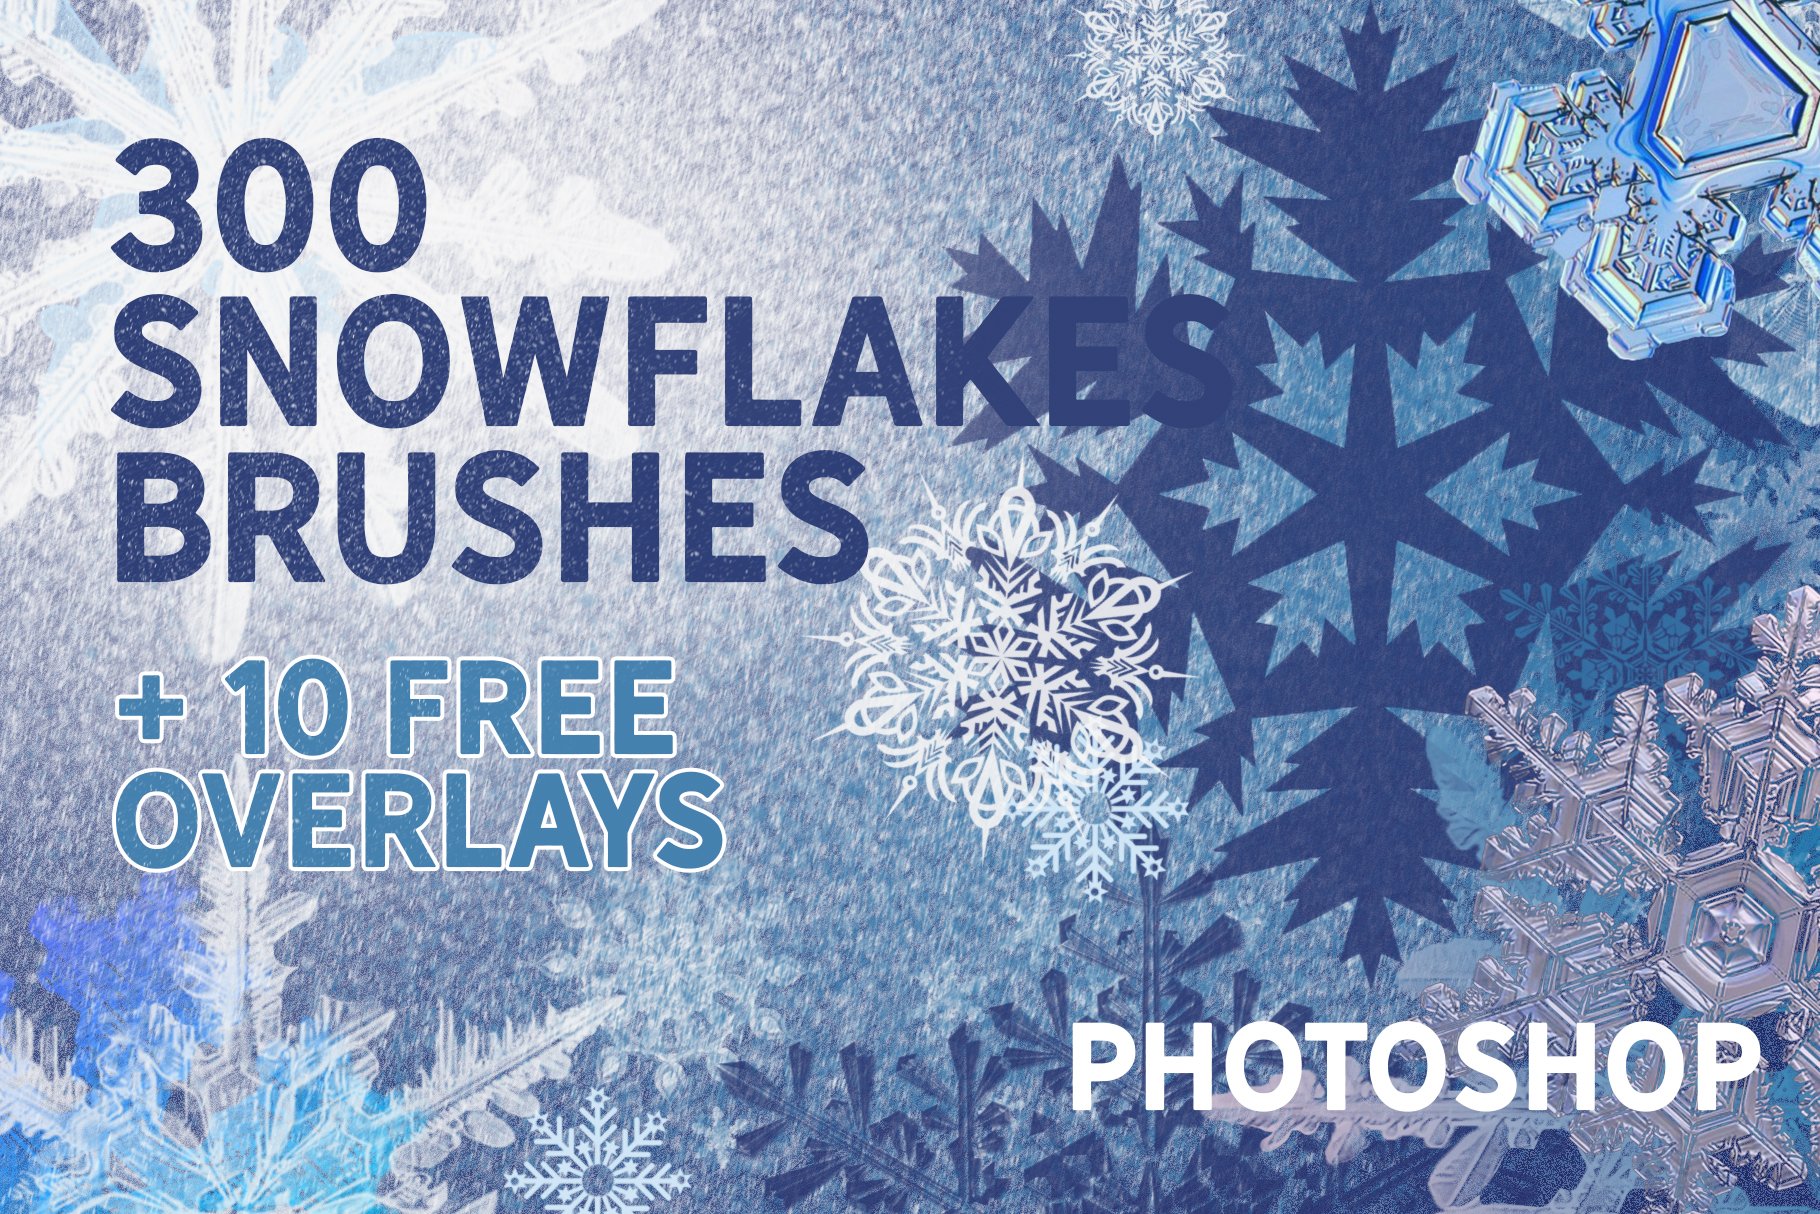 SNOWFLAKES BRUSHES & FREE OVERLAYScover image.